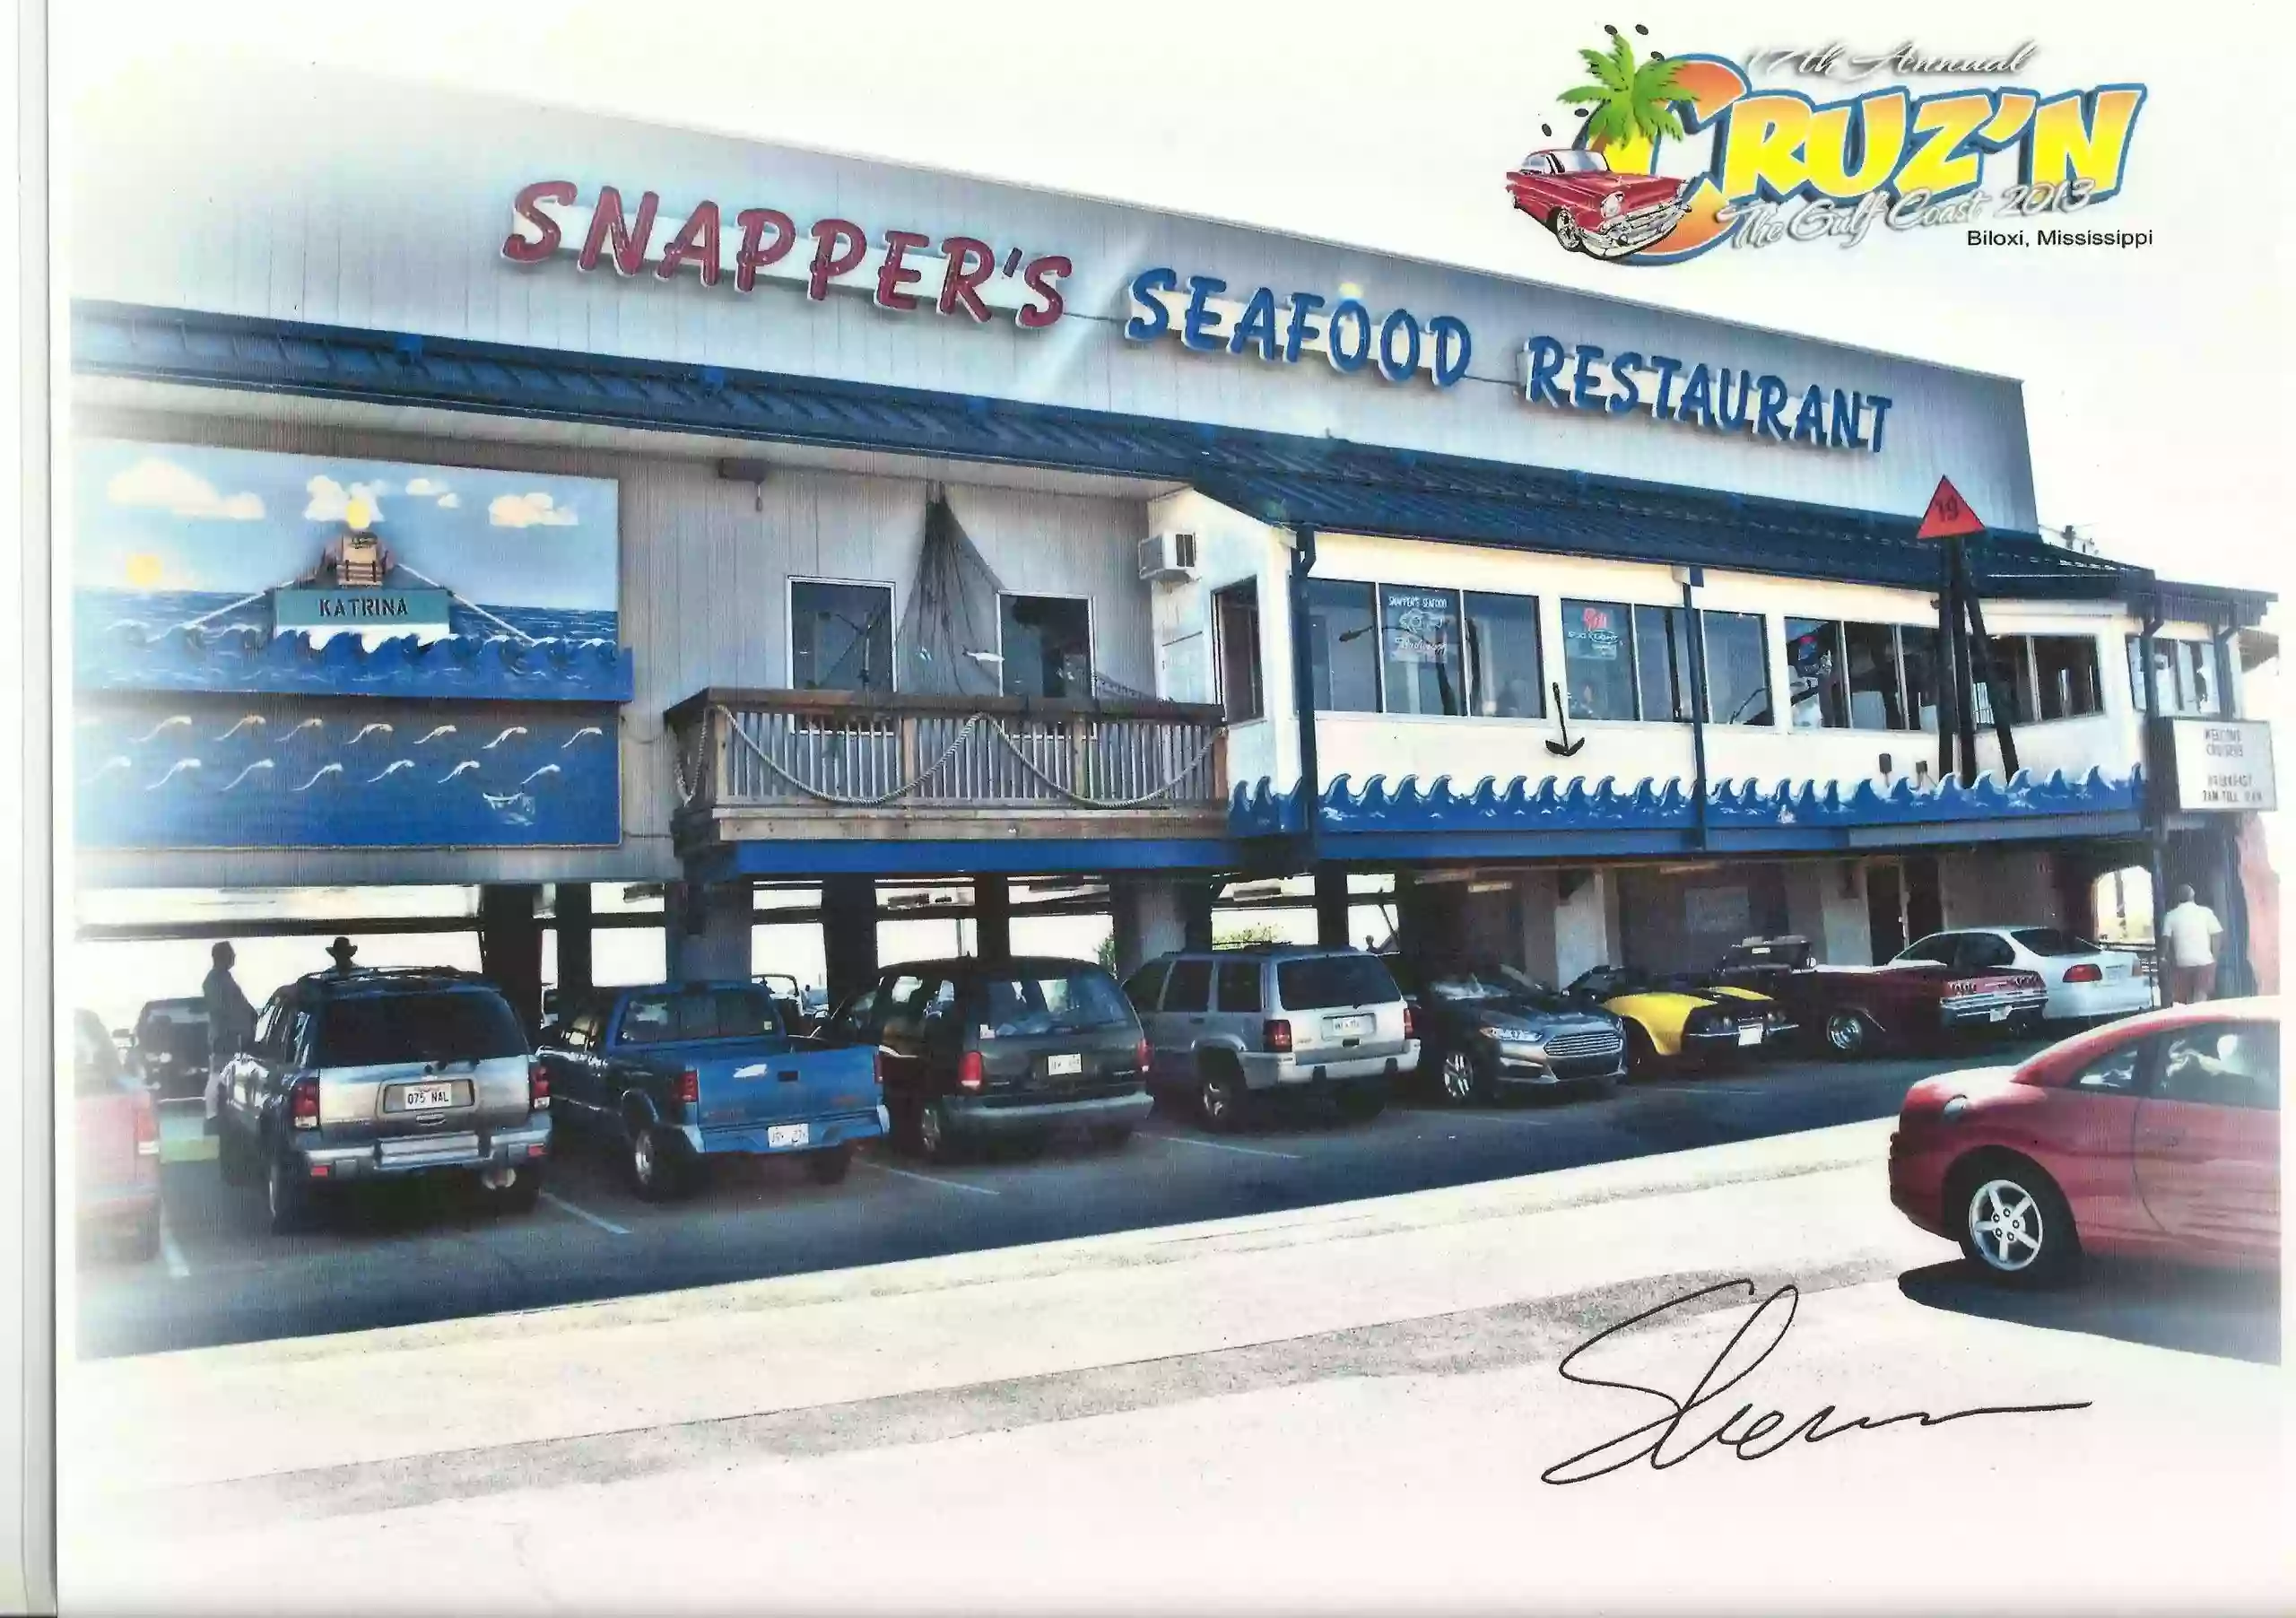 Snapper's Seafood